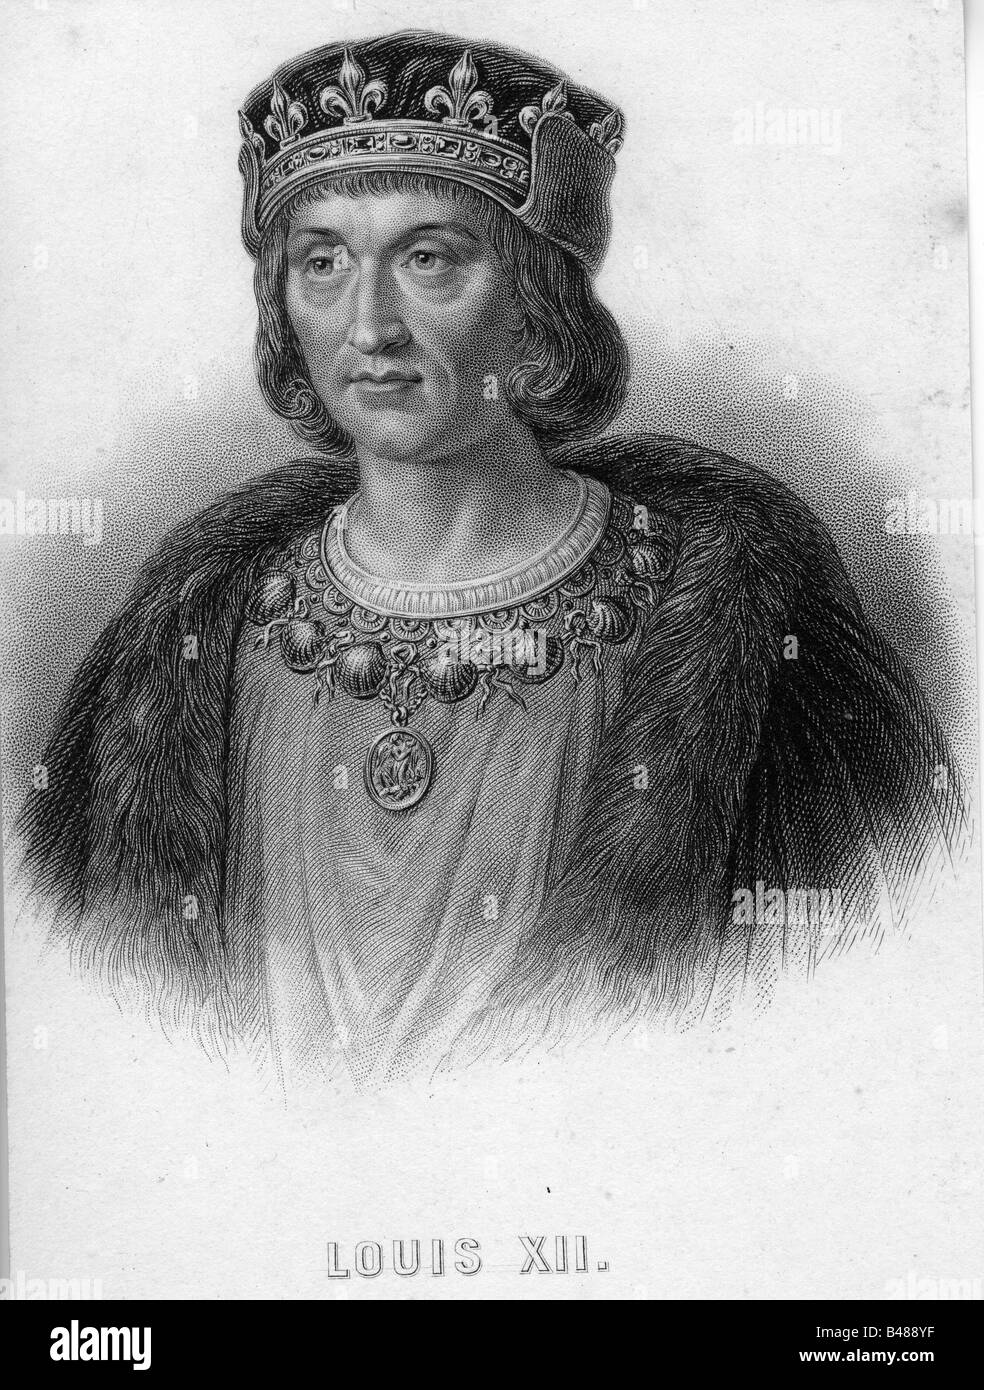 Louis XII, 27.6.1462 - 1.1.1515, King of France 7.4.1498 - 1.1.1515, portrait, engraving, 19th century, Valois, Duke of Orleans, Duke of Milan 1499 - 1512, King Luigi IV of Naples 1501 - 1503, Italy, 16th century, , Artist's Copyright has not to be cleared Stock Photo